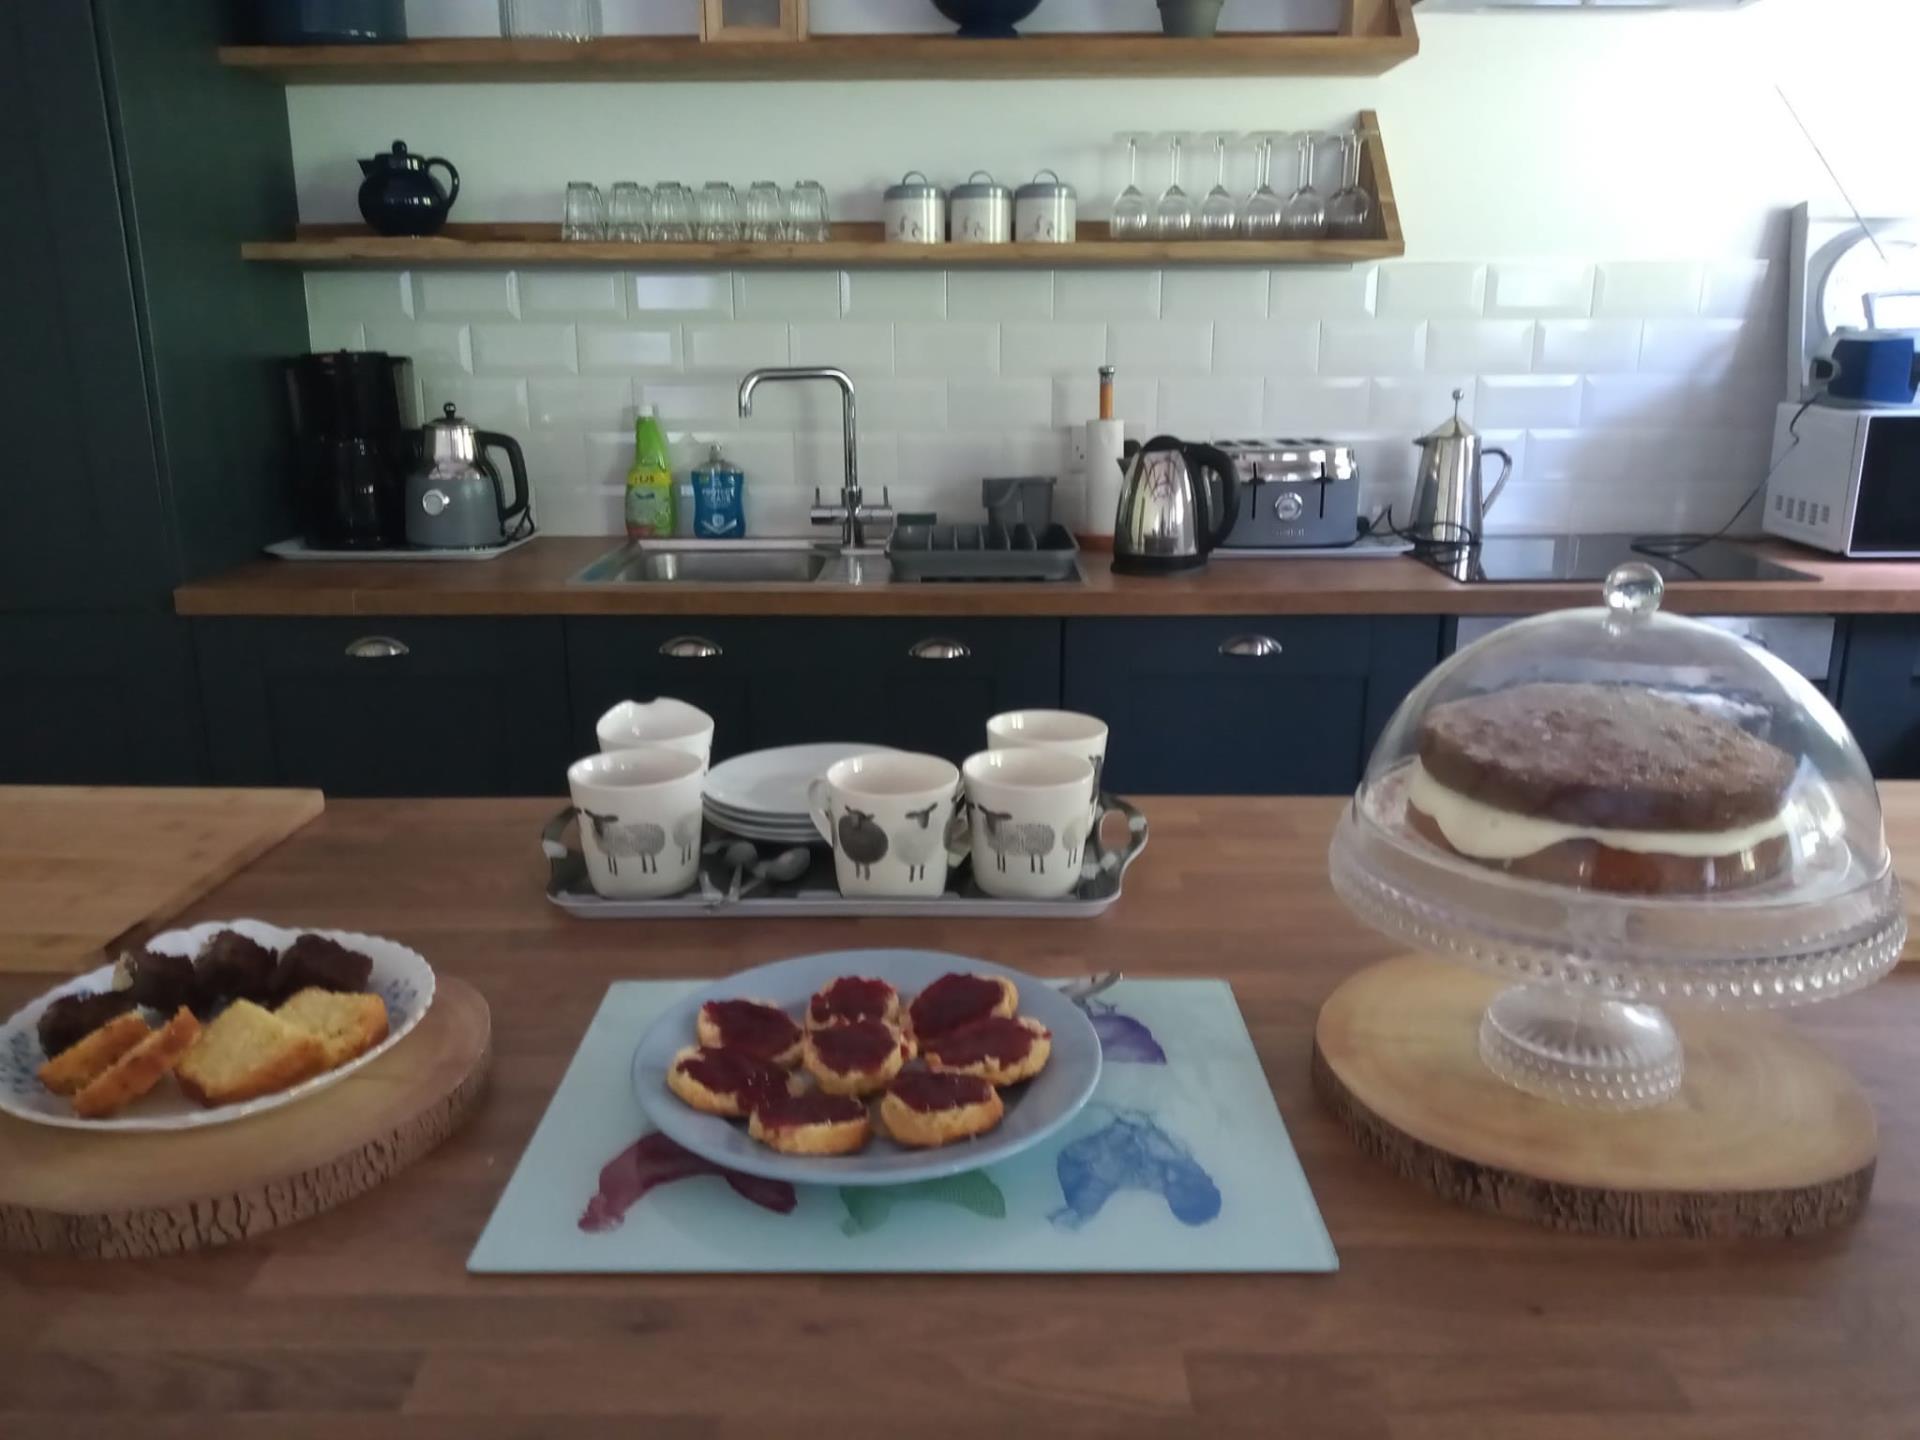 Tea and cakes in the kitchen!